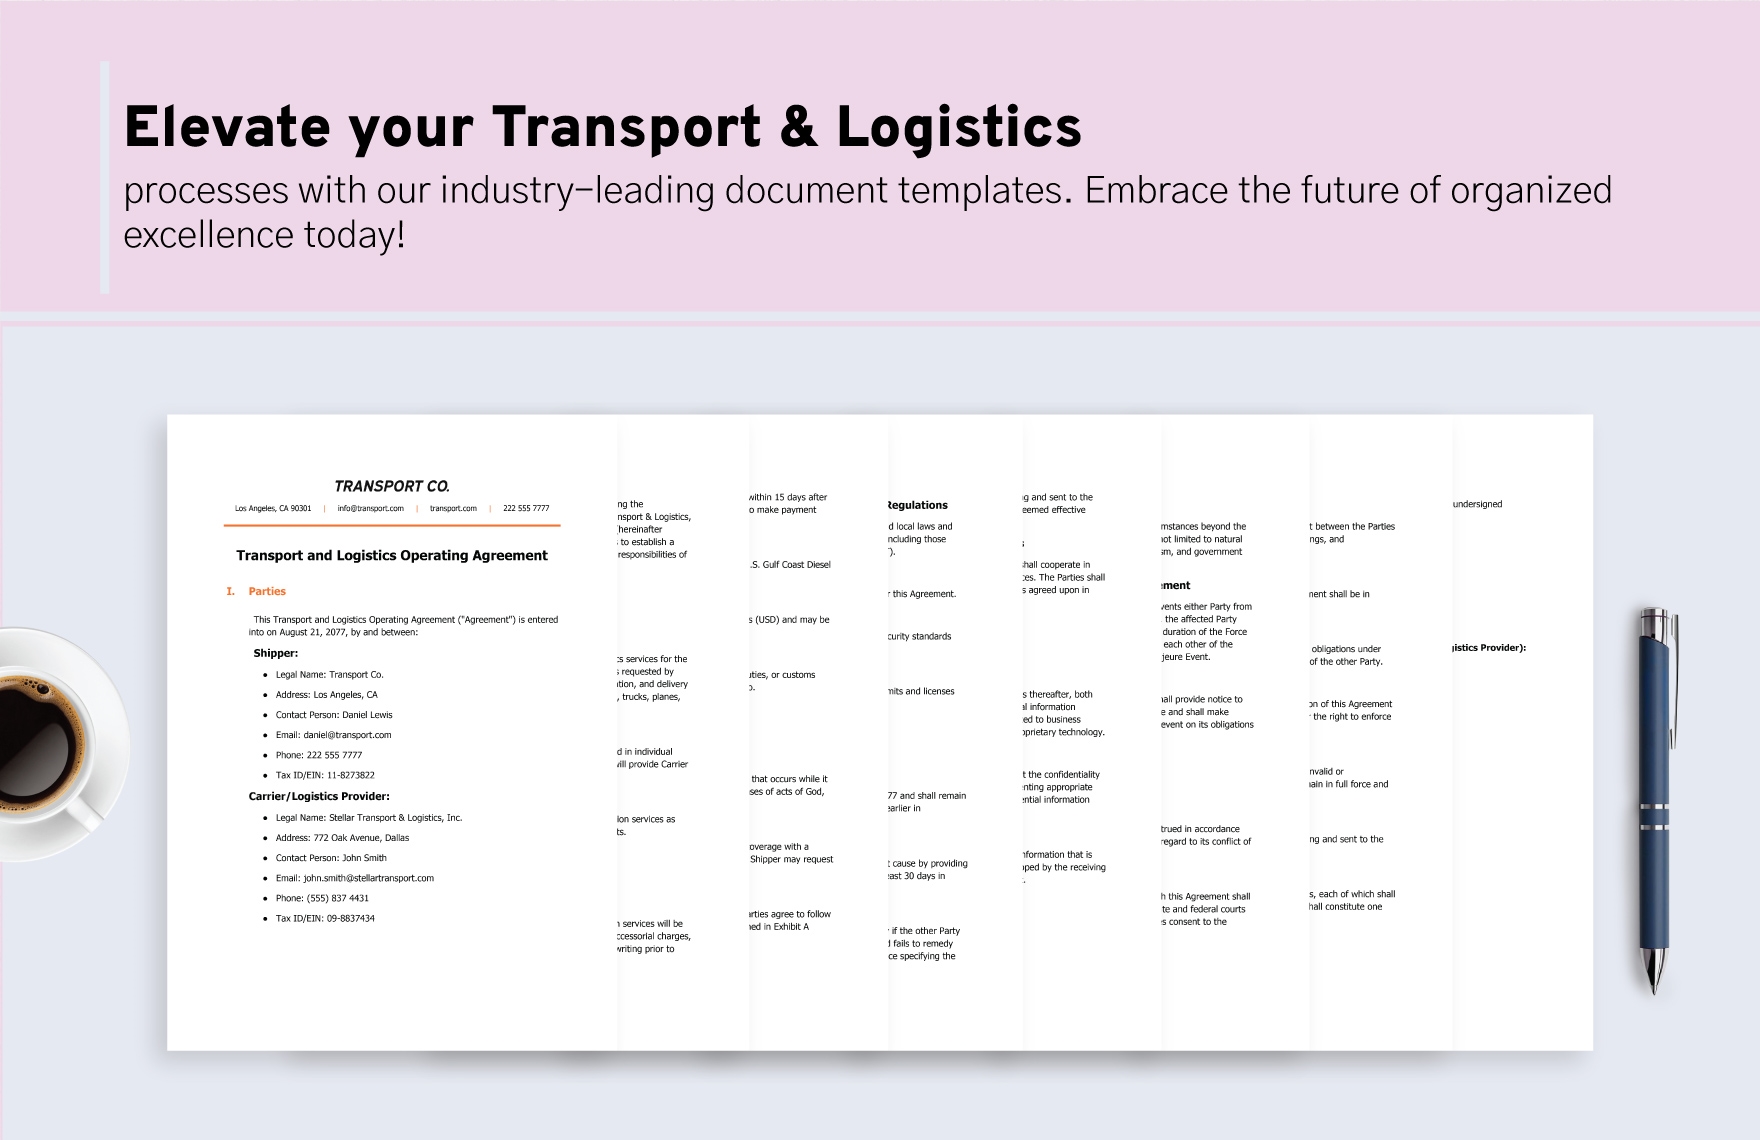 Transport and Logistics Operating Agreement Template